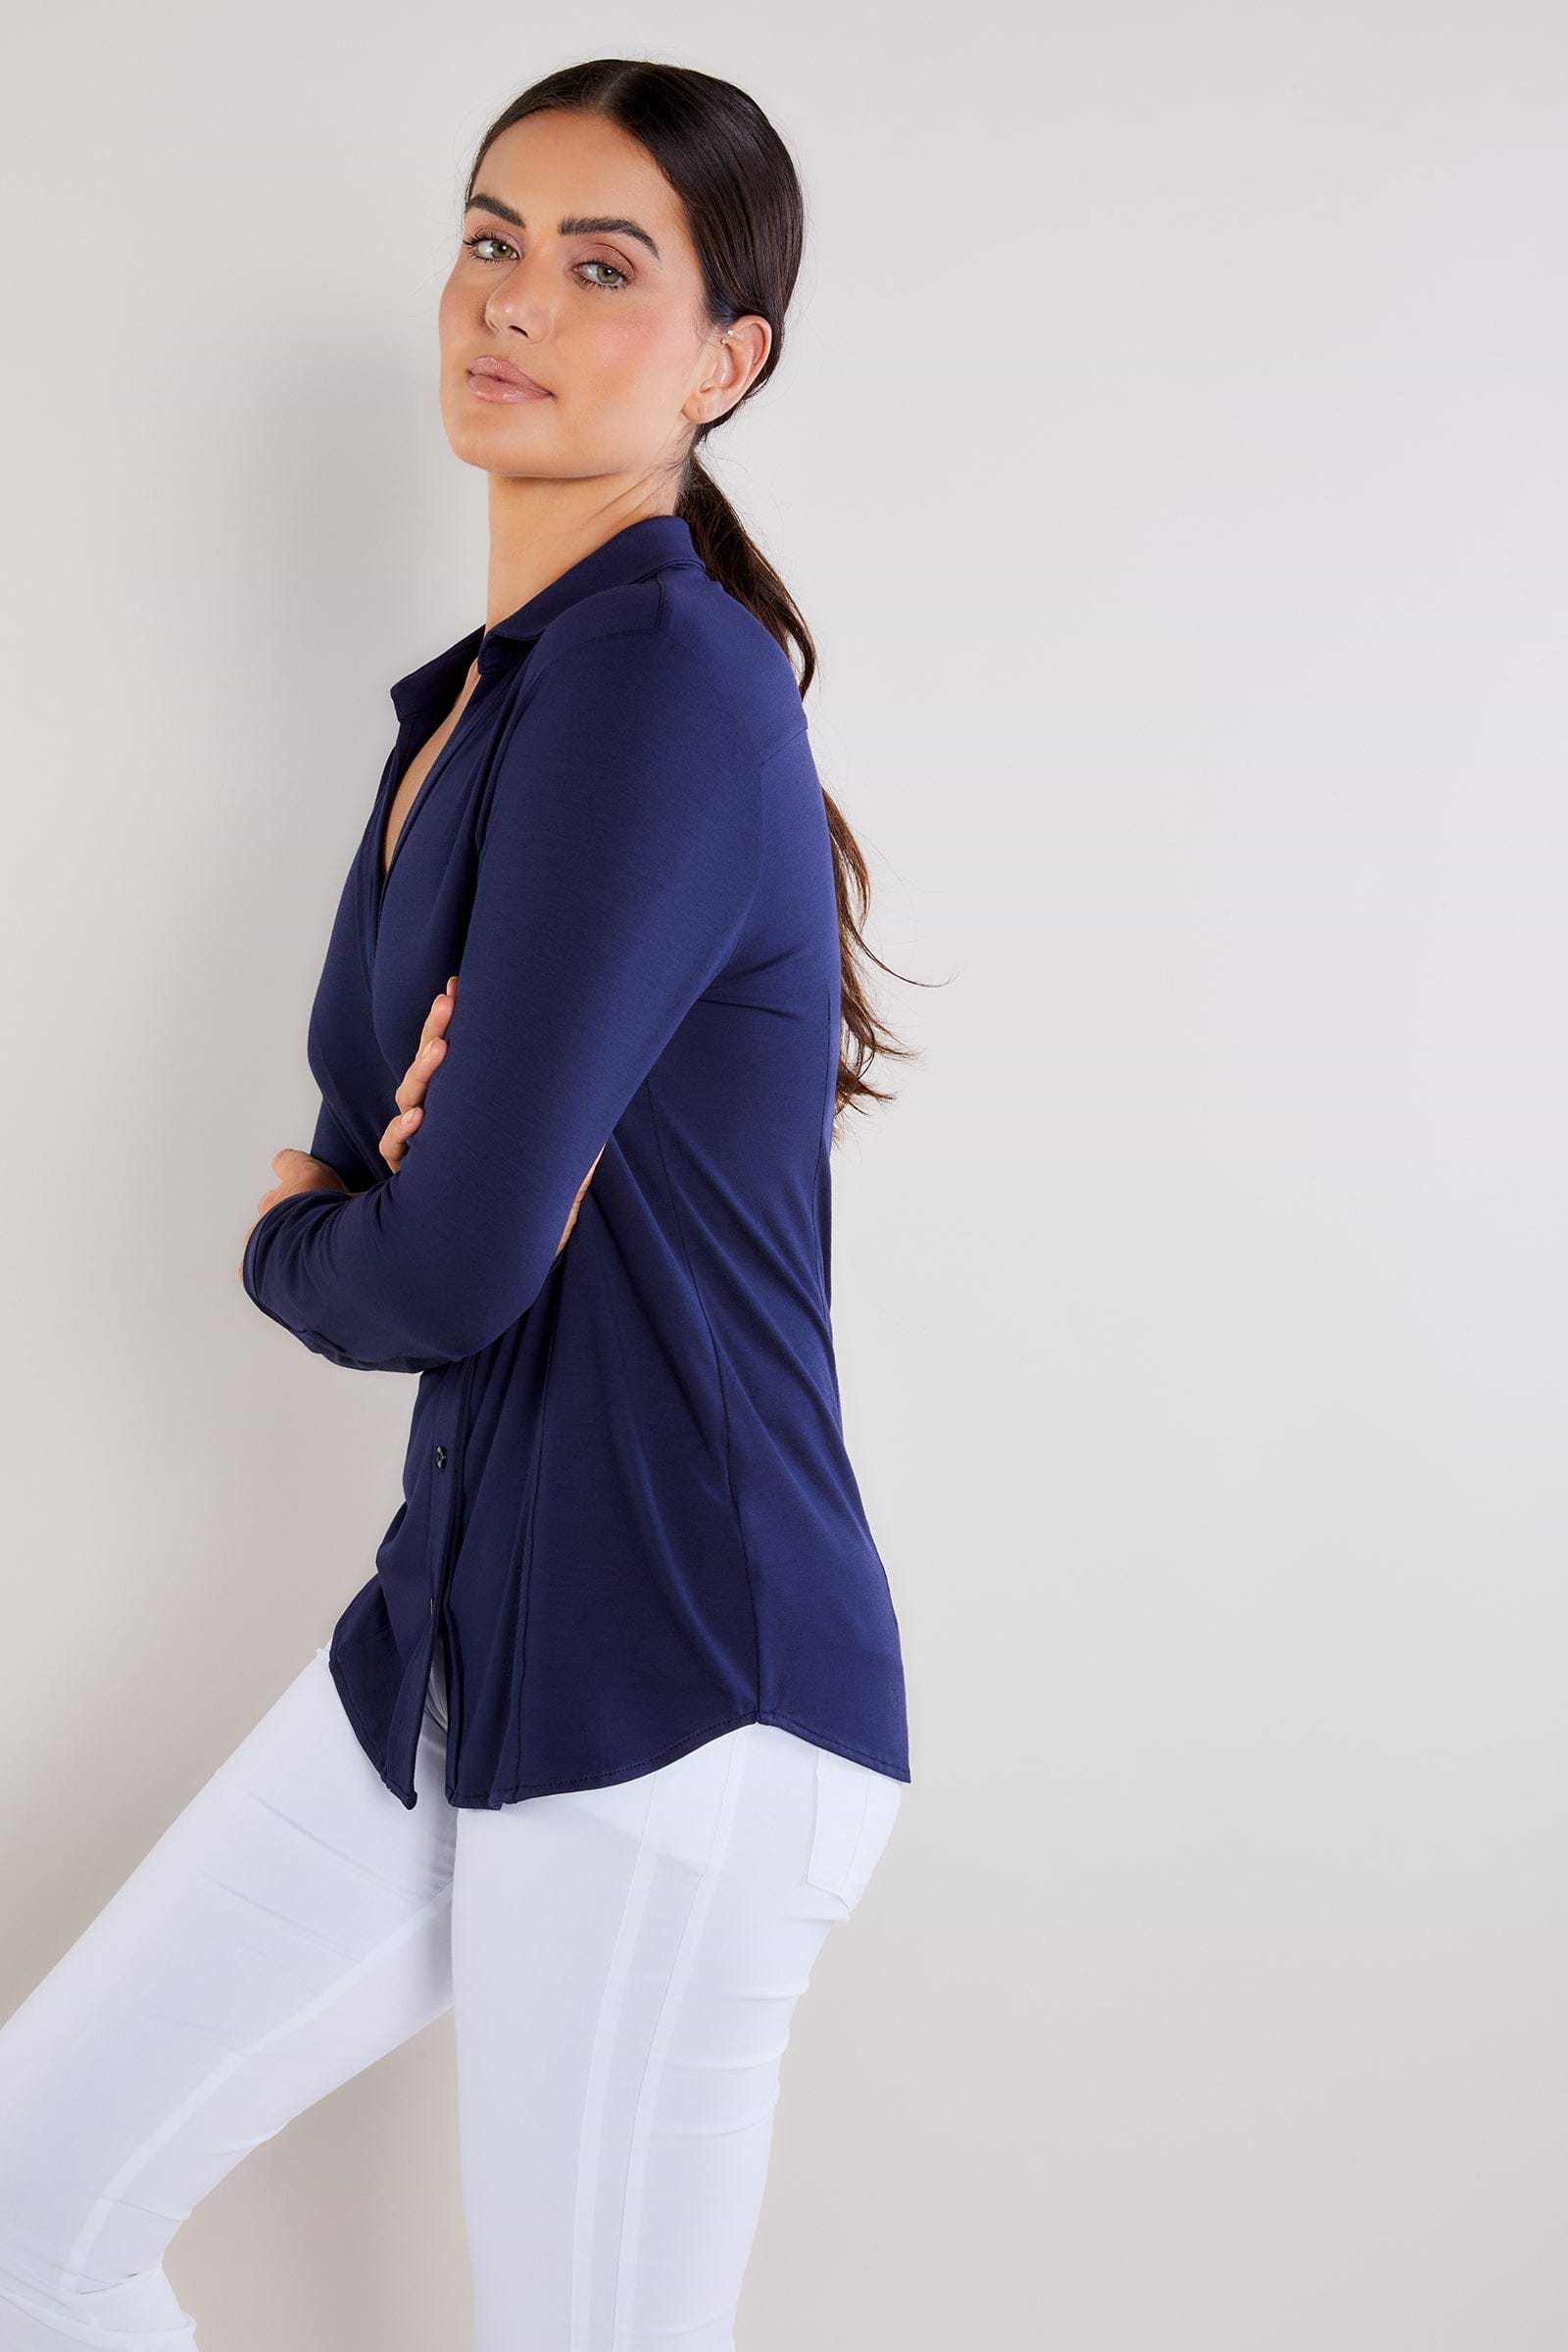 The Best Travel Shirt. Woman Showing the Side Profile of a Nikki Longsleeve Jersey Shirt in Navy